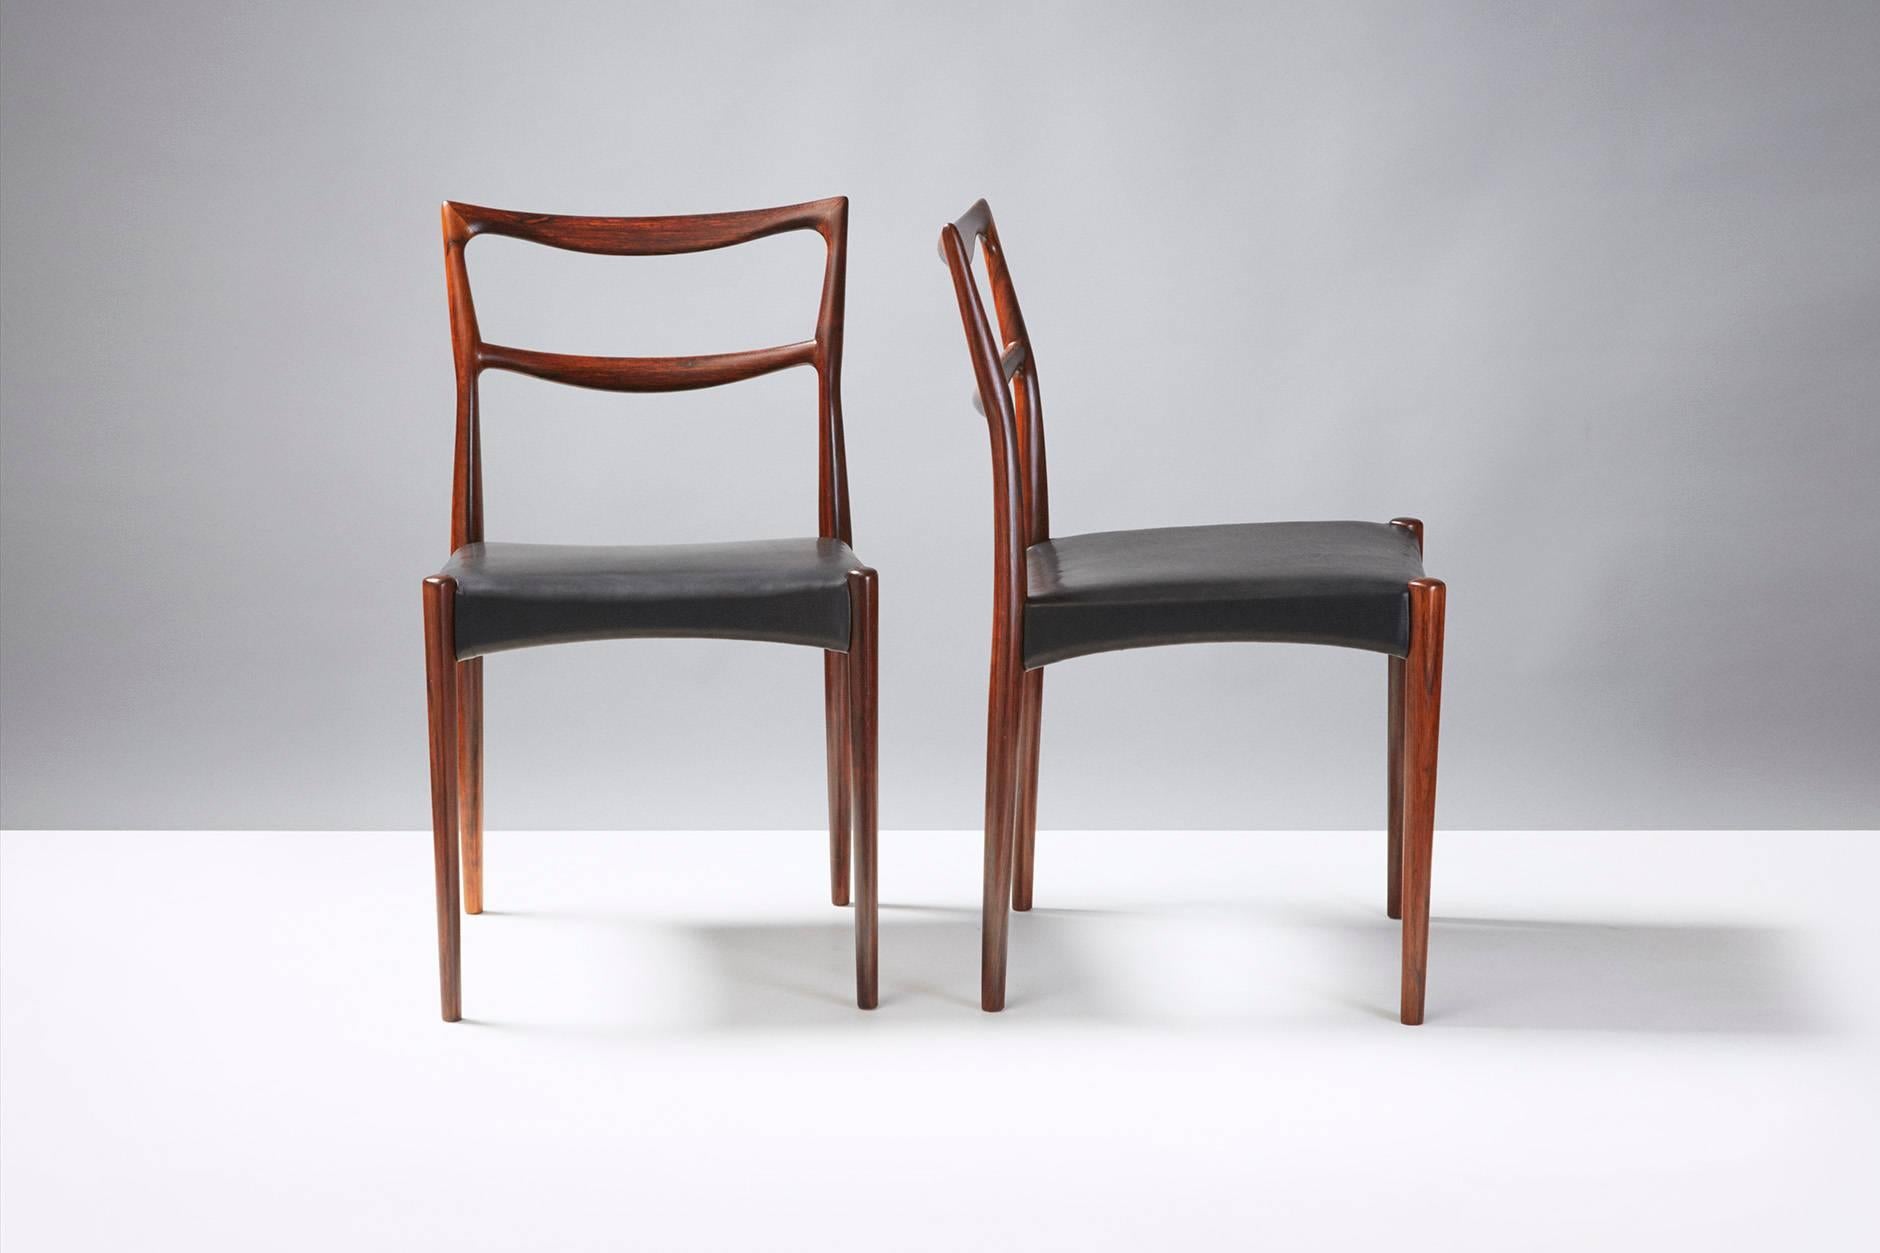 Rarely seen, sculptural dining chairs from Henry W. Klein. New black aniline leather seats. Stunning, exotic rosewood grain. Produced by Bramin, Denmark.

    